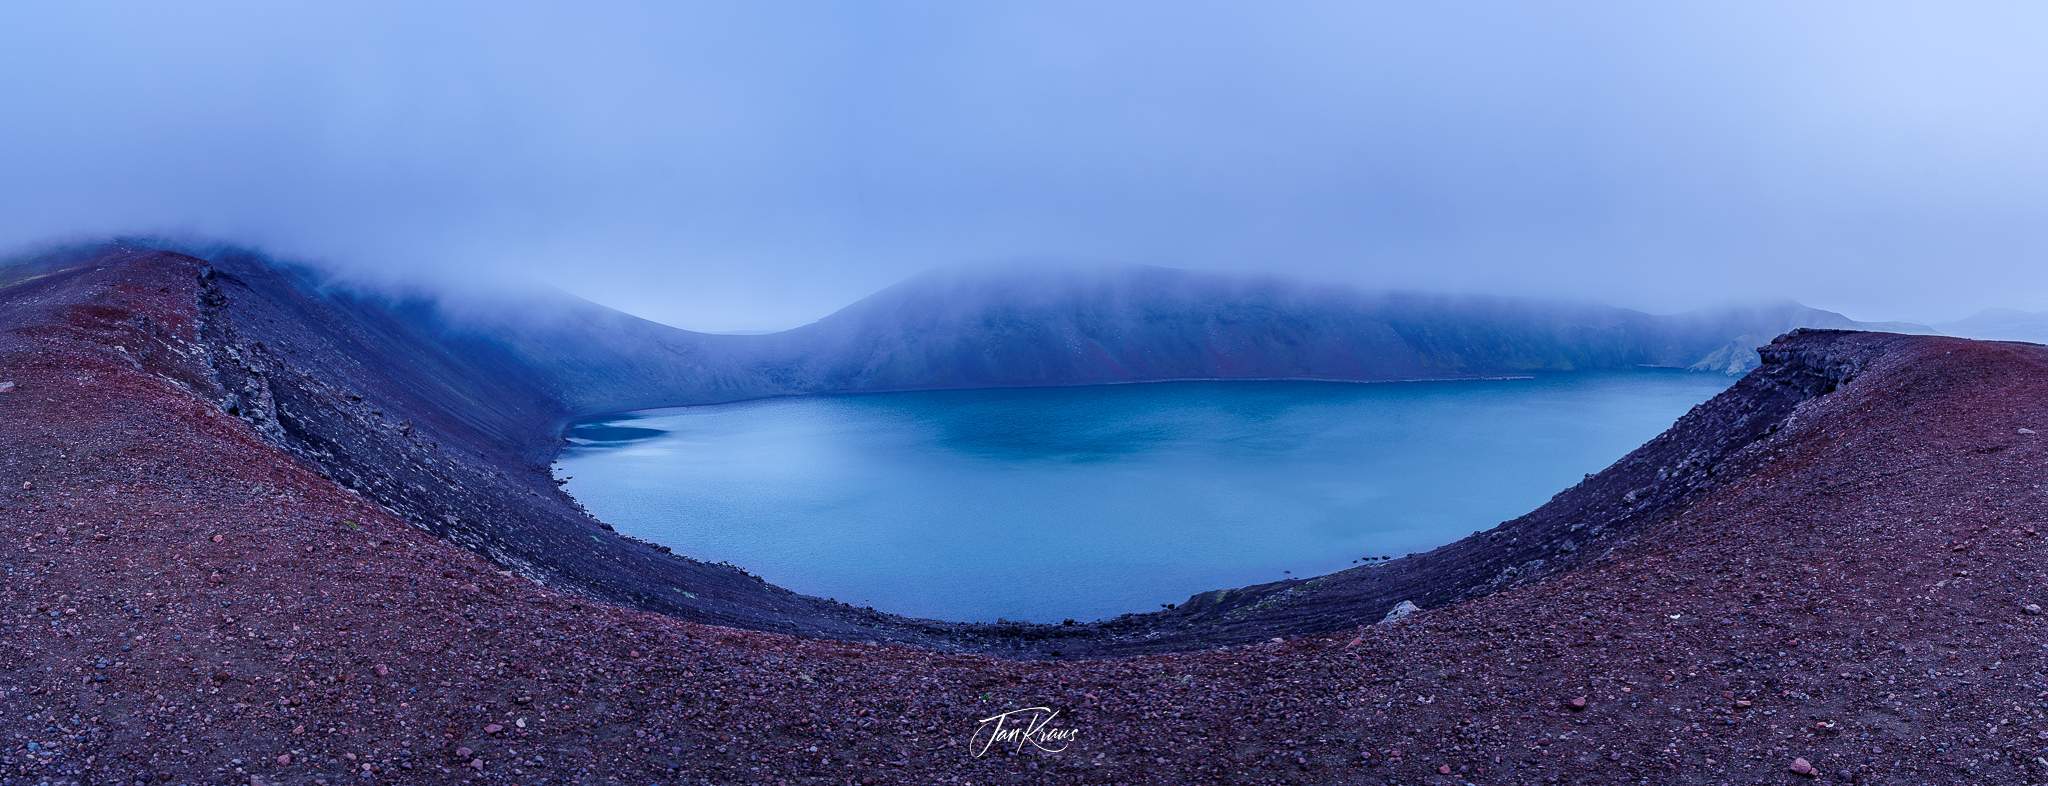 Wide angle view of Bláhylur lake accessed from F-208 road, Iceland